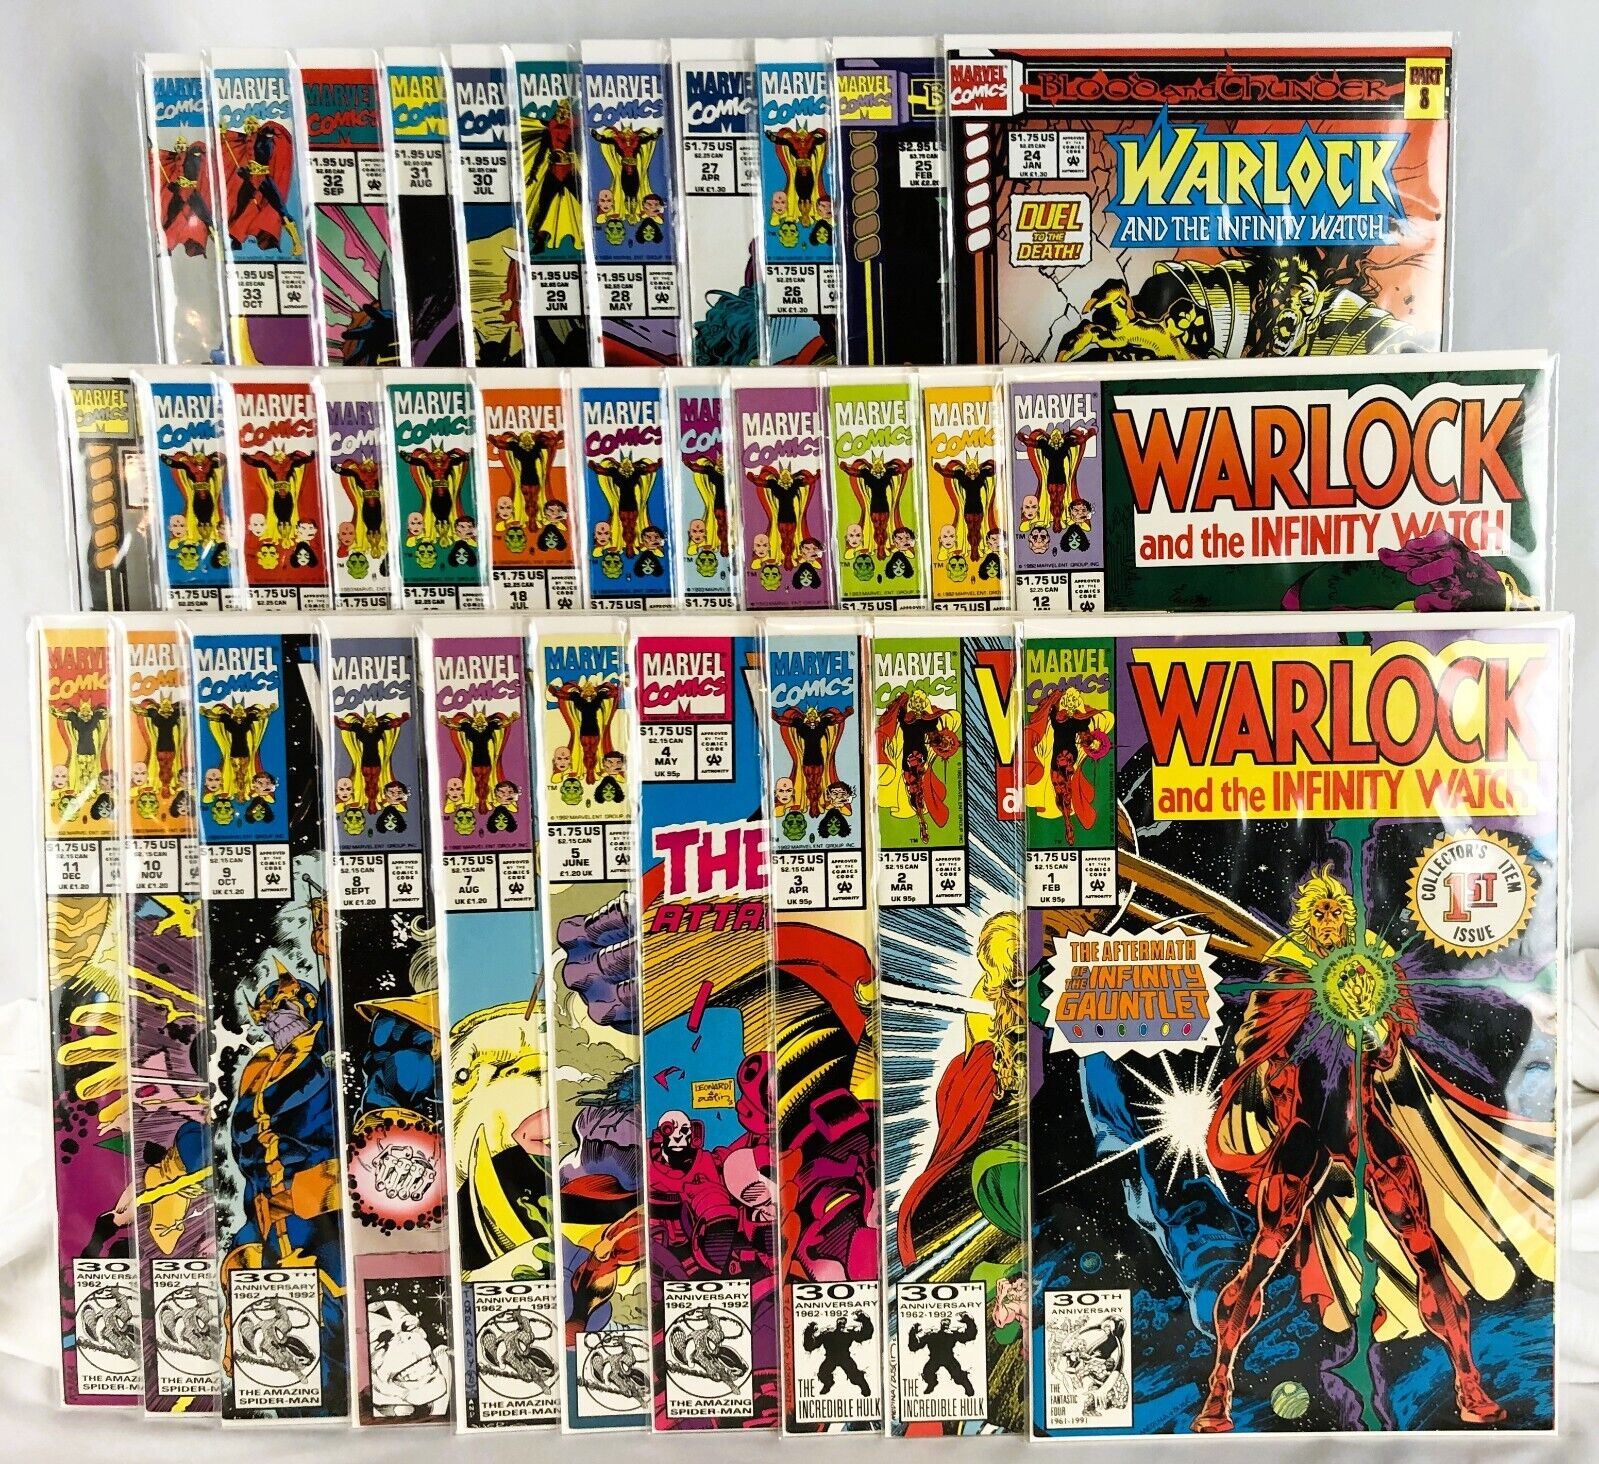 Warlock and the Infinity Watch #1-5, 7-34 (1992-94, Marvel) 33 Issue Run